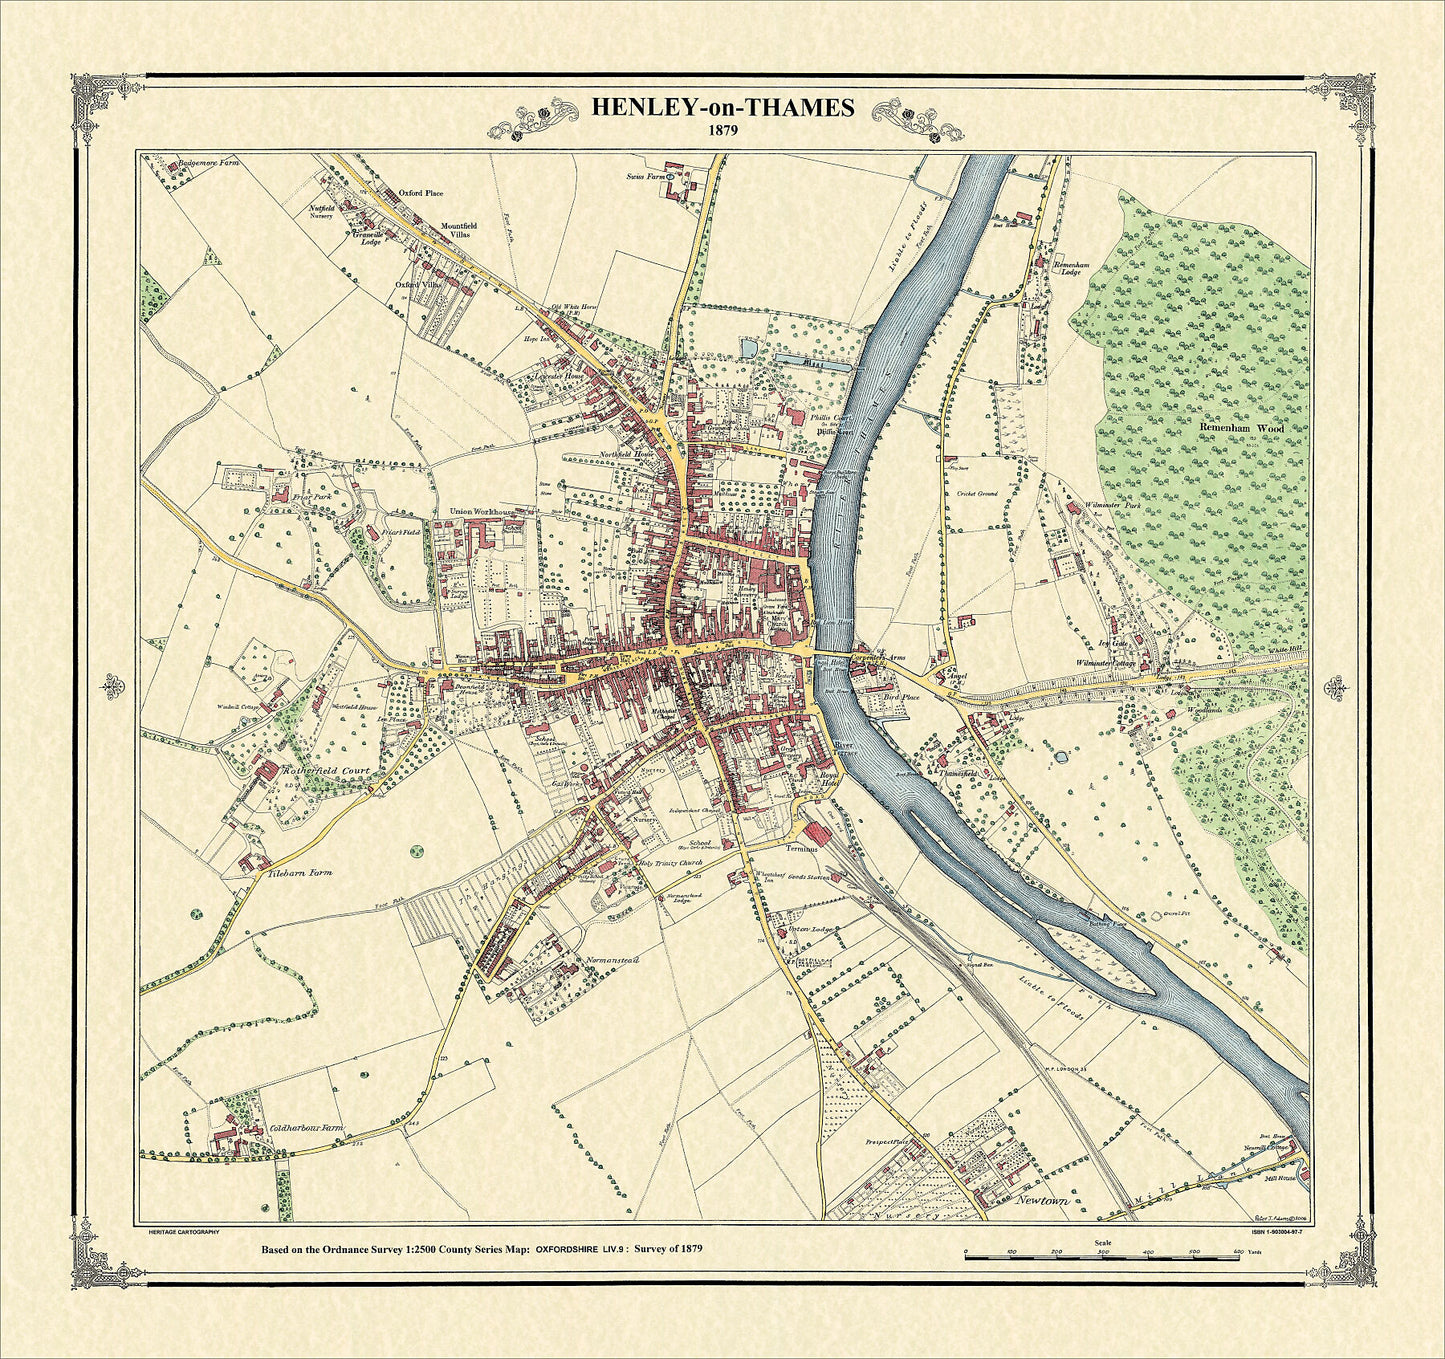 Coloured Victorian map of Henley-on-Thames in 1879 by Peter J Adams of Heritage Cartography